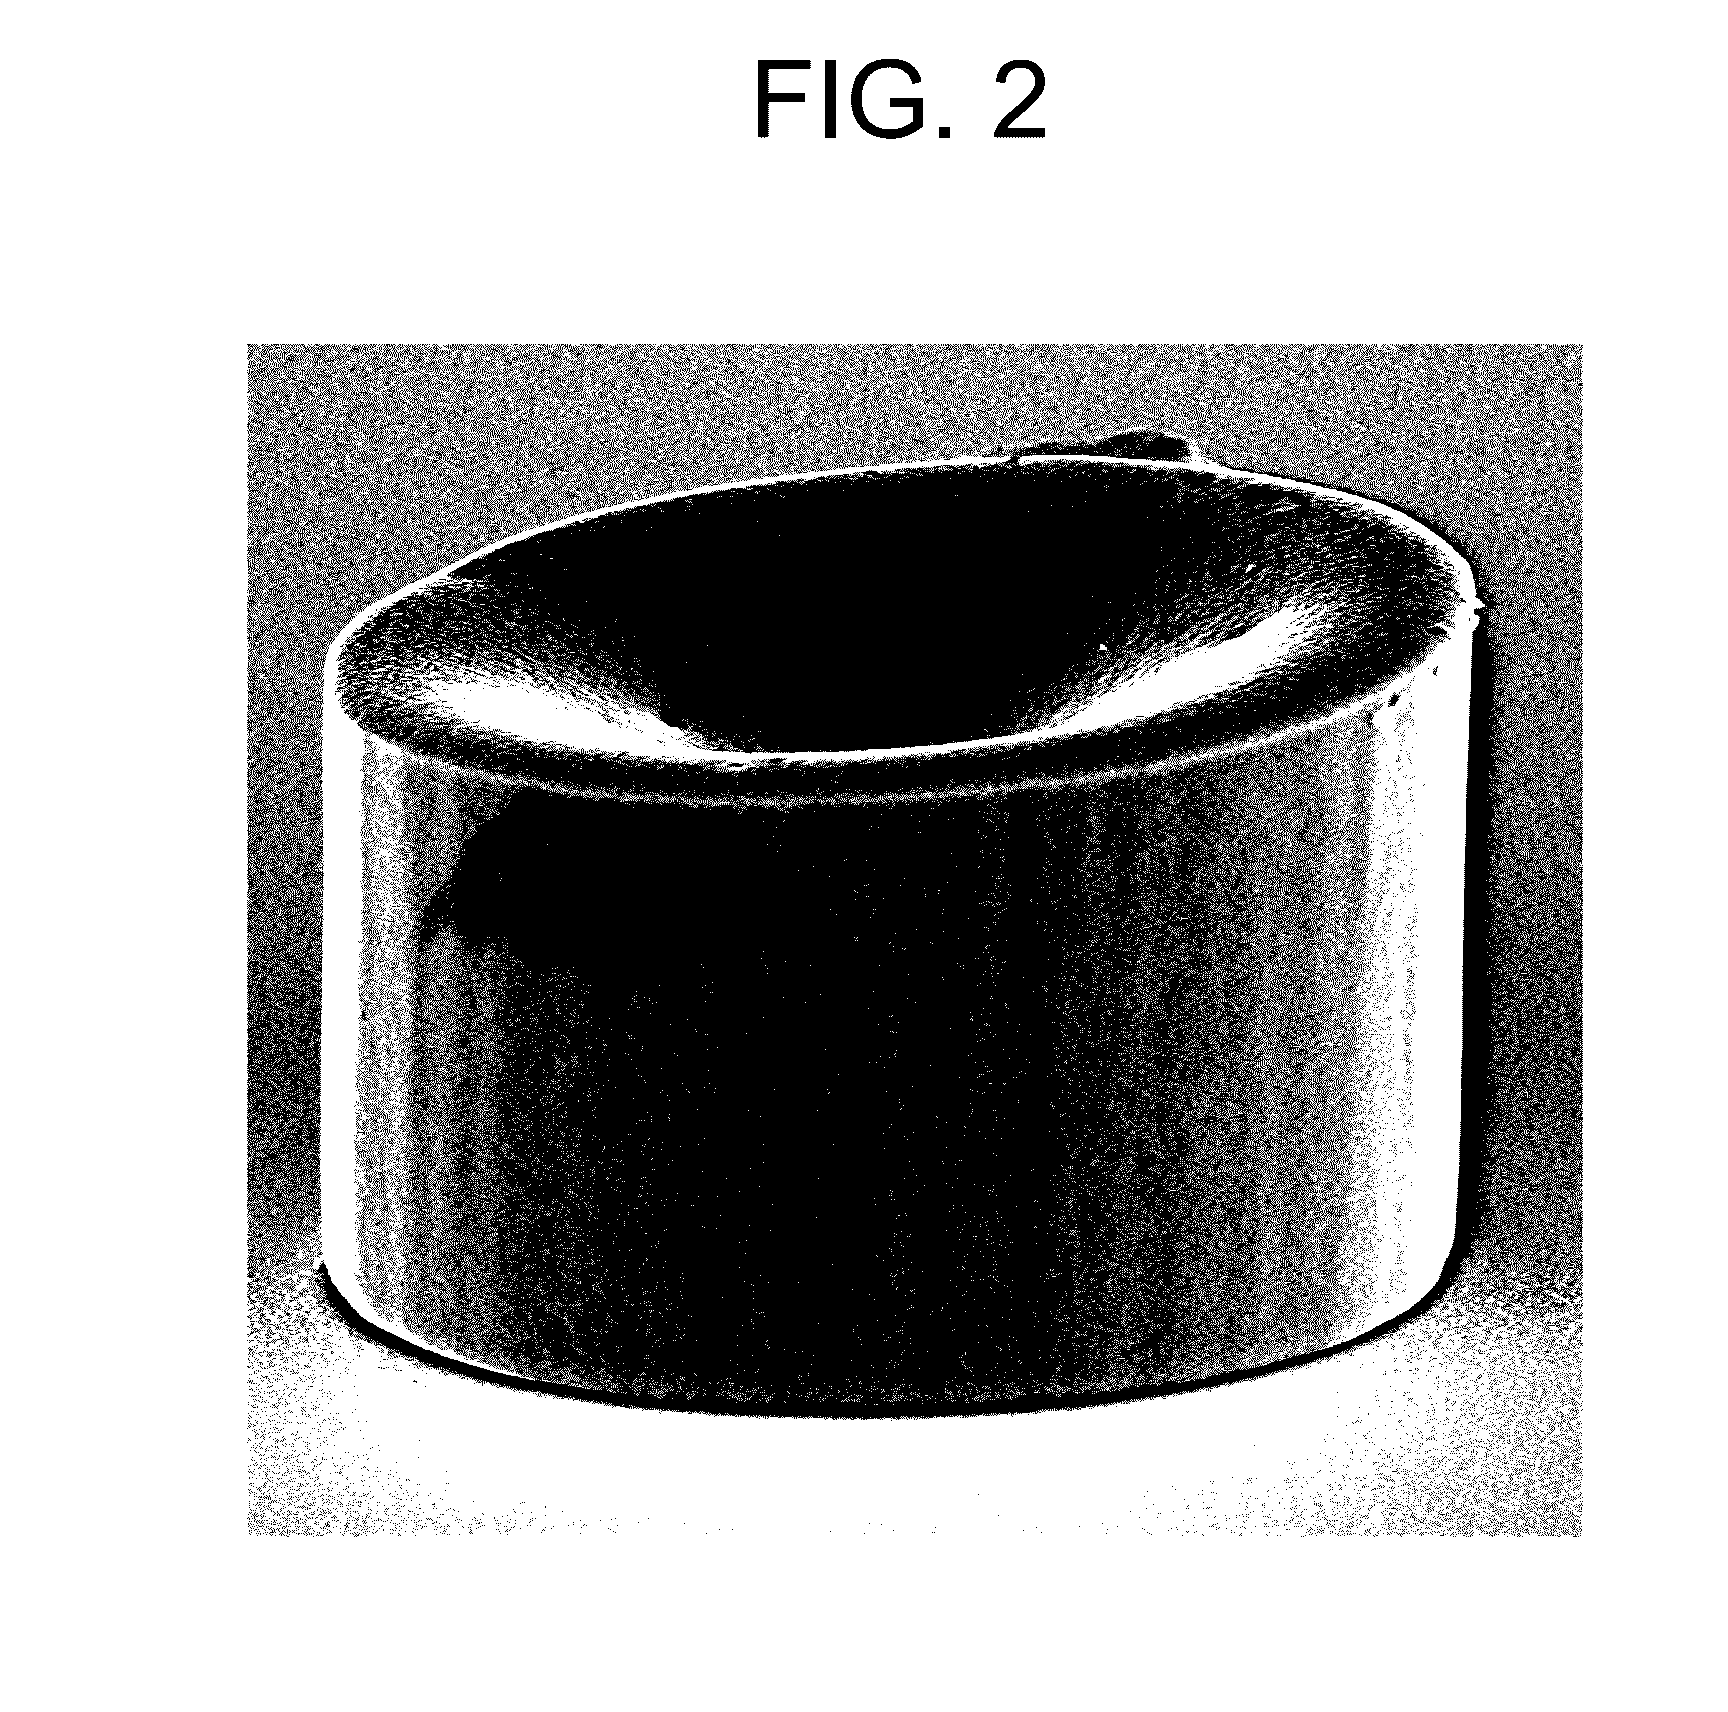 Method of electroplating photoresist defined features from copper electroplating baths containing reaction products of imidazole compounds, bisepoxides and halobenzyl compounds